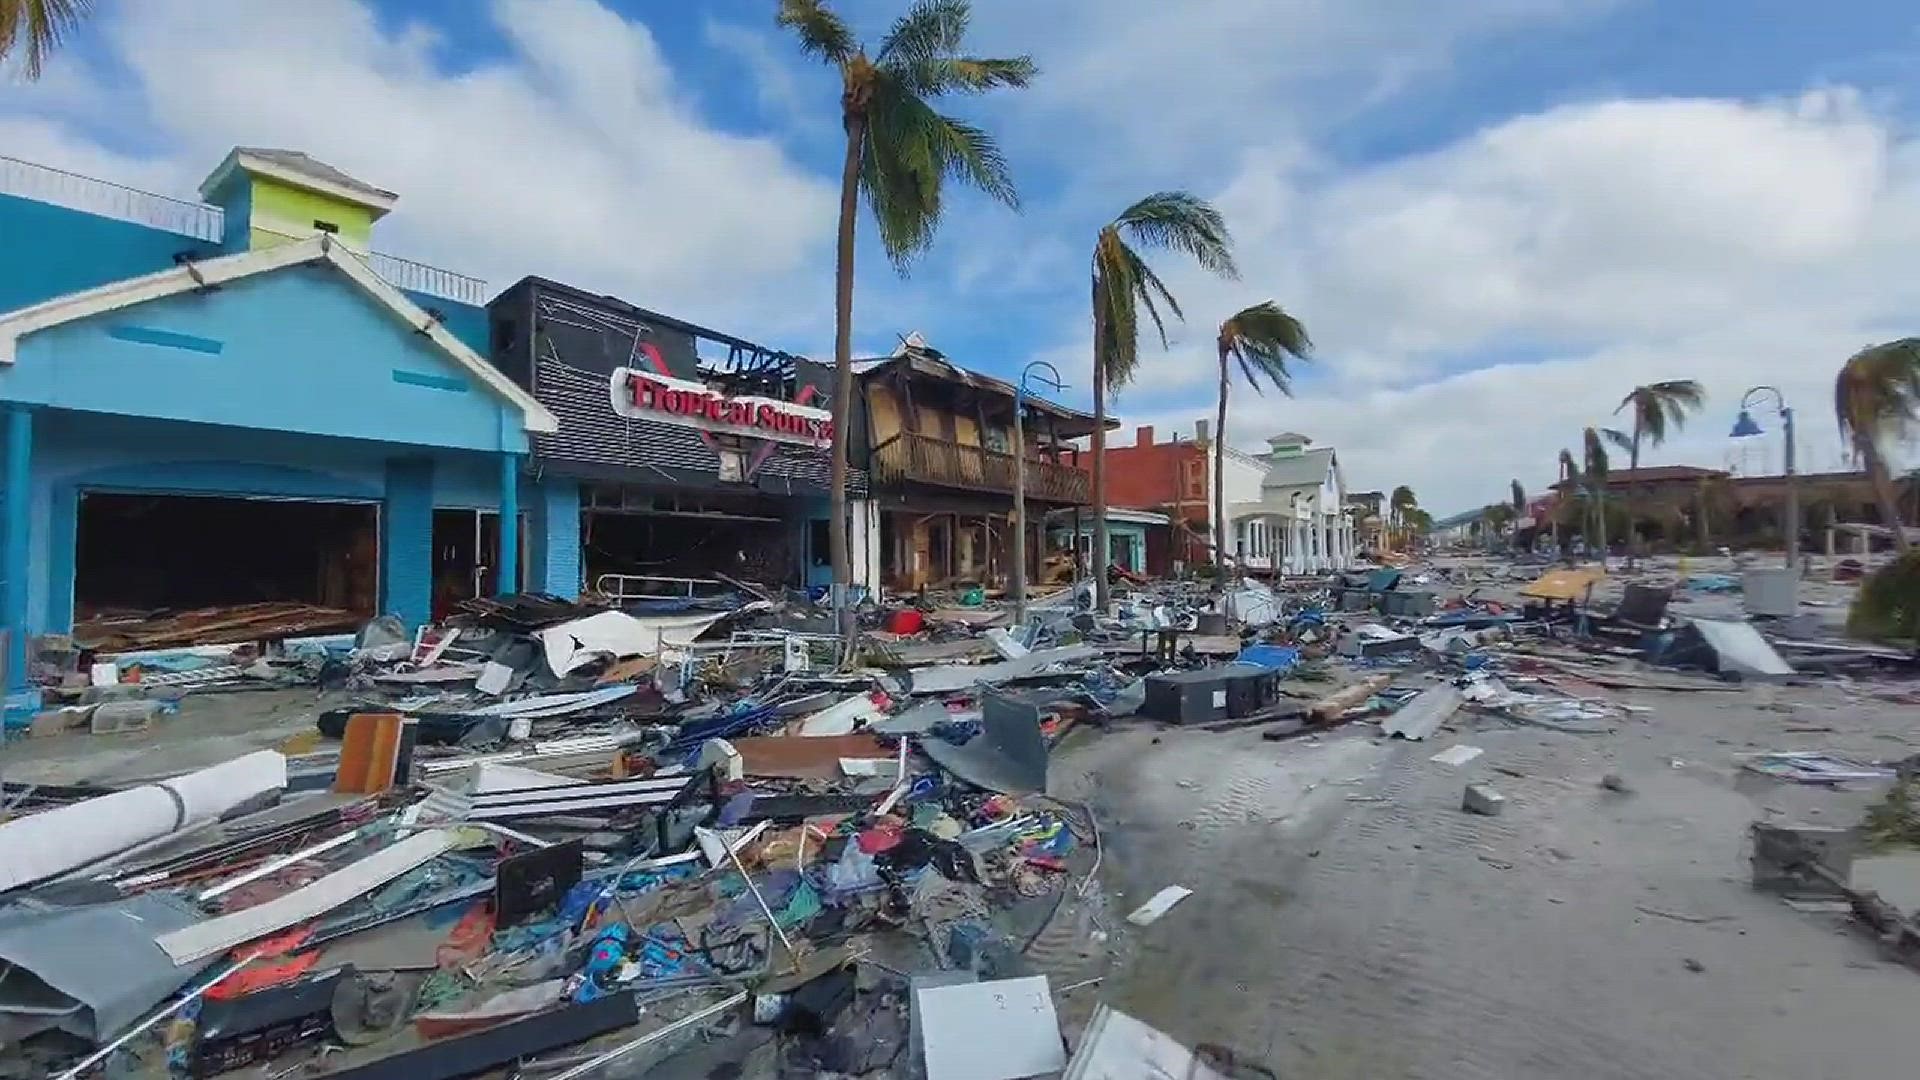 Video taken by Twitter user Bobby Pratt shows Fort Myers Beach leveled in the aftermath of Hurricane Ian.